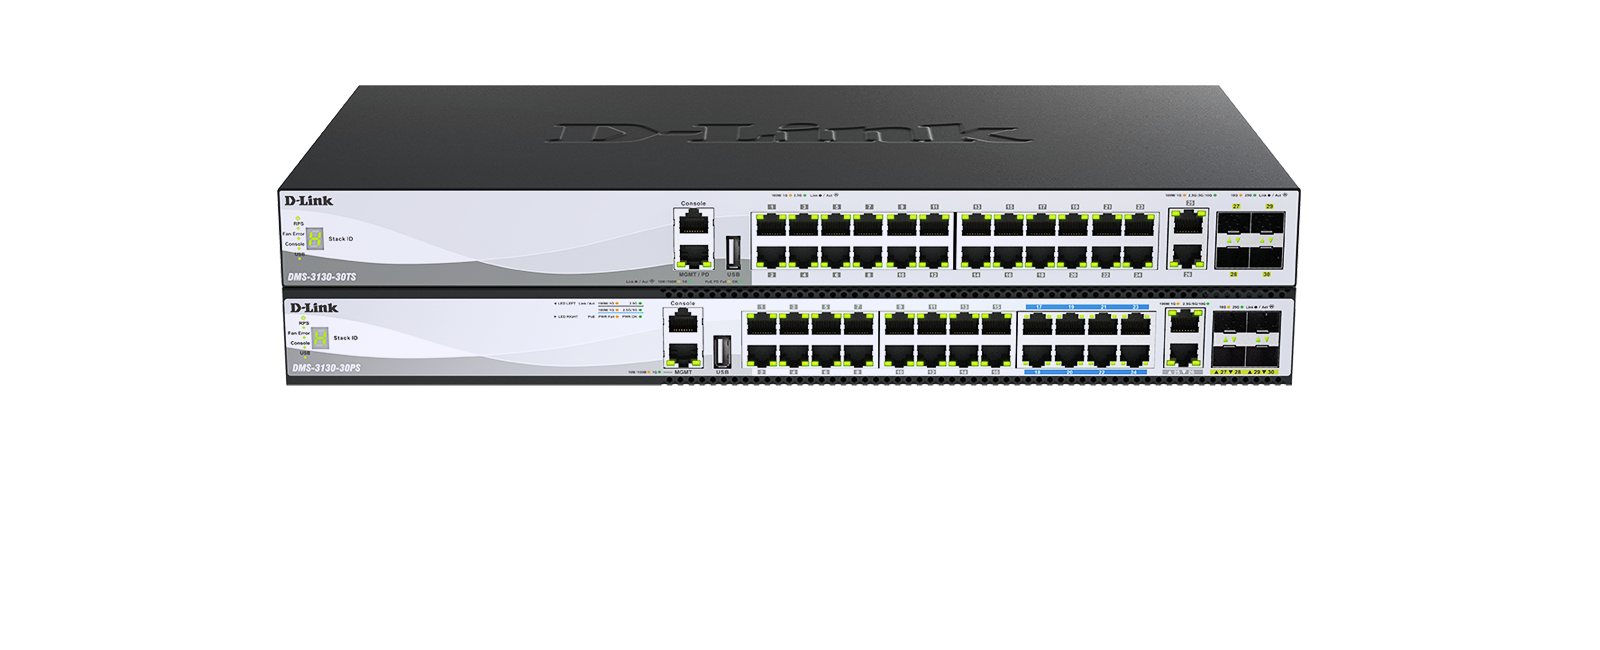 DMS-3130 Layer 3 Stackable Multi-Gigabit Managed Switches - Front view.